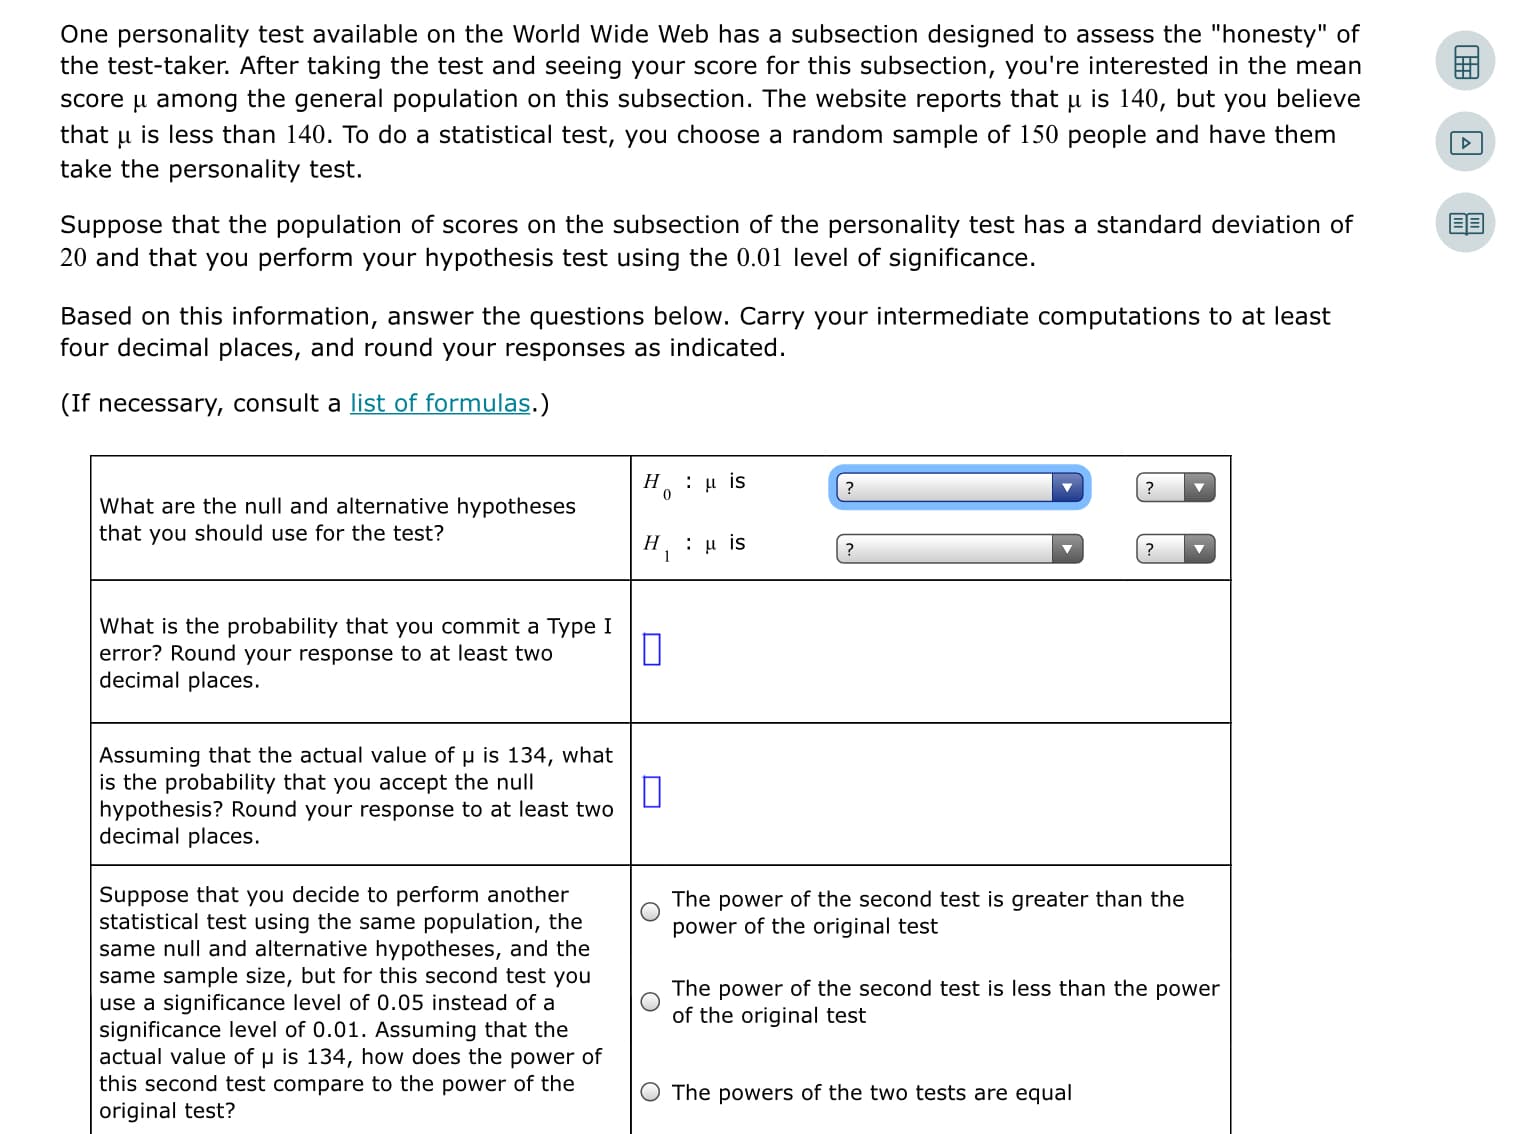 One personality test available on the World Wide Web has a subsection designed to assess the "honesty" of
the test-taker. After taking the test and seeing your score for this subsection, you're interested in the mean
score u among the general population on this subsection. The website reports that µ is 140, but you believe
is less than 140. To do a statistical test, you choose a random sample of 150 people and have them
that
take the personality test.
Suppose that the population of scores on the subsection of the personality test has a standard deviation of
20 and that you perform your hypothesis test using the 0.01 level of significance.
Based on this information, answer the questions below. Carry your intermediate computations to at least
four decimal places, and round your responses as indicated.
(If necessary, consult a list of formulas.)
H. : u is
What are the null and alternative hypotheses
that you should use for the test?
Η, : μ is
What is the probability that you commit a Type I
error? Round your response to at least two
decimal places.
Assuming that the actual value of u is 134, what
is the probability that you accept the null
hypothesis? Round your response to at least two
decimal places.
Suppose that you decide to perform another
statistical test using the same population, the
same null and alternative hypotheses, and the
same sample size, but for this second test you
use a significance level of 0.05 instead of a
significance level of 0.01. Assuming that the
actual value of u is 134, how does the power of
this second test compare to the power of the
original test?
The power of the second test is greater than the
power of the original test
The power of the second test is less than the power
of the original test
The powers of the two tests are equal
